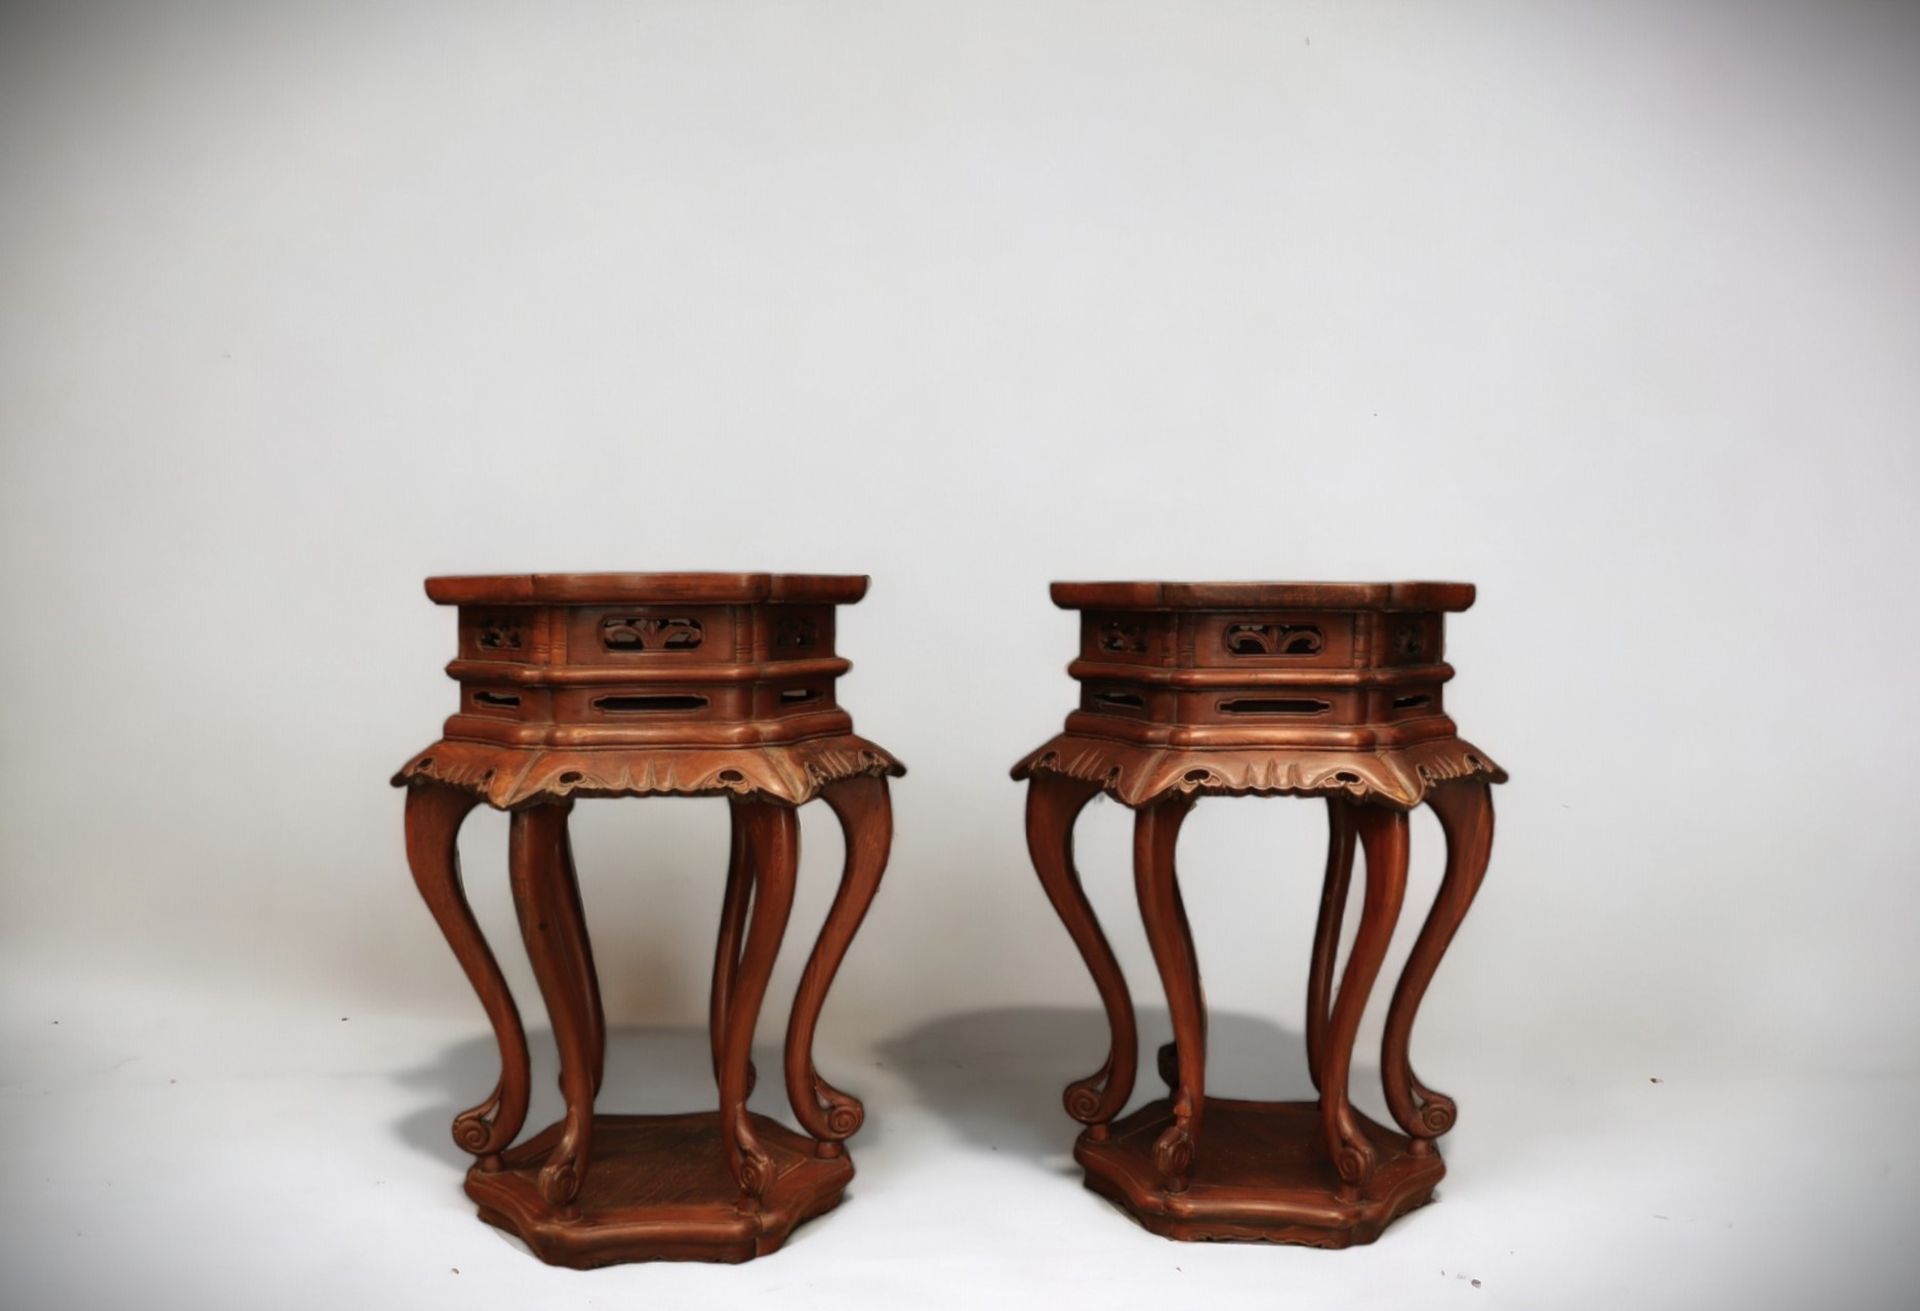 China - Important pair of carved wood sellettes (incense-holder stand). - Image 3 of 3